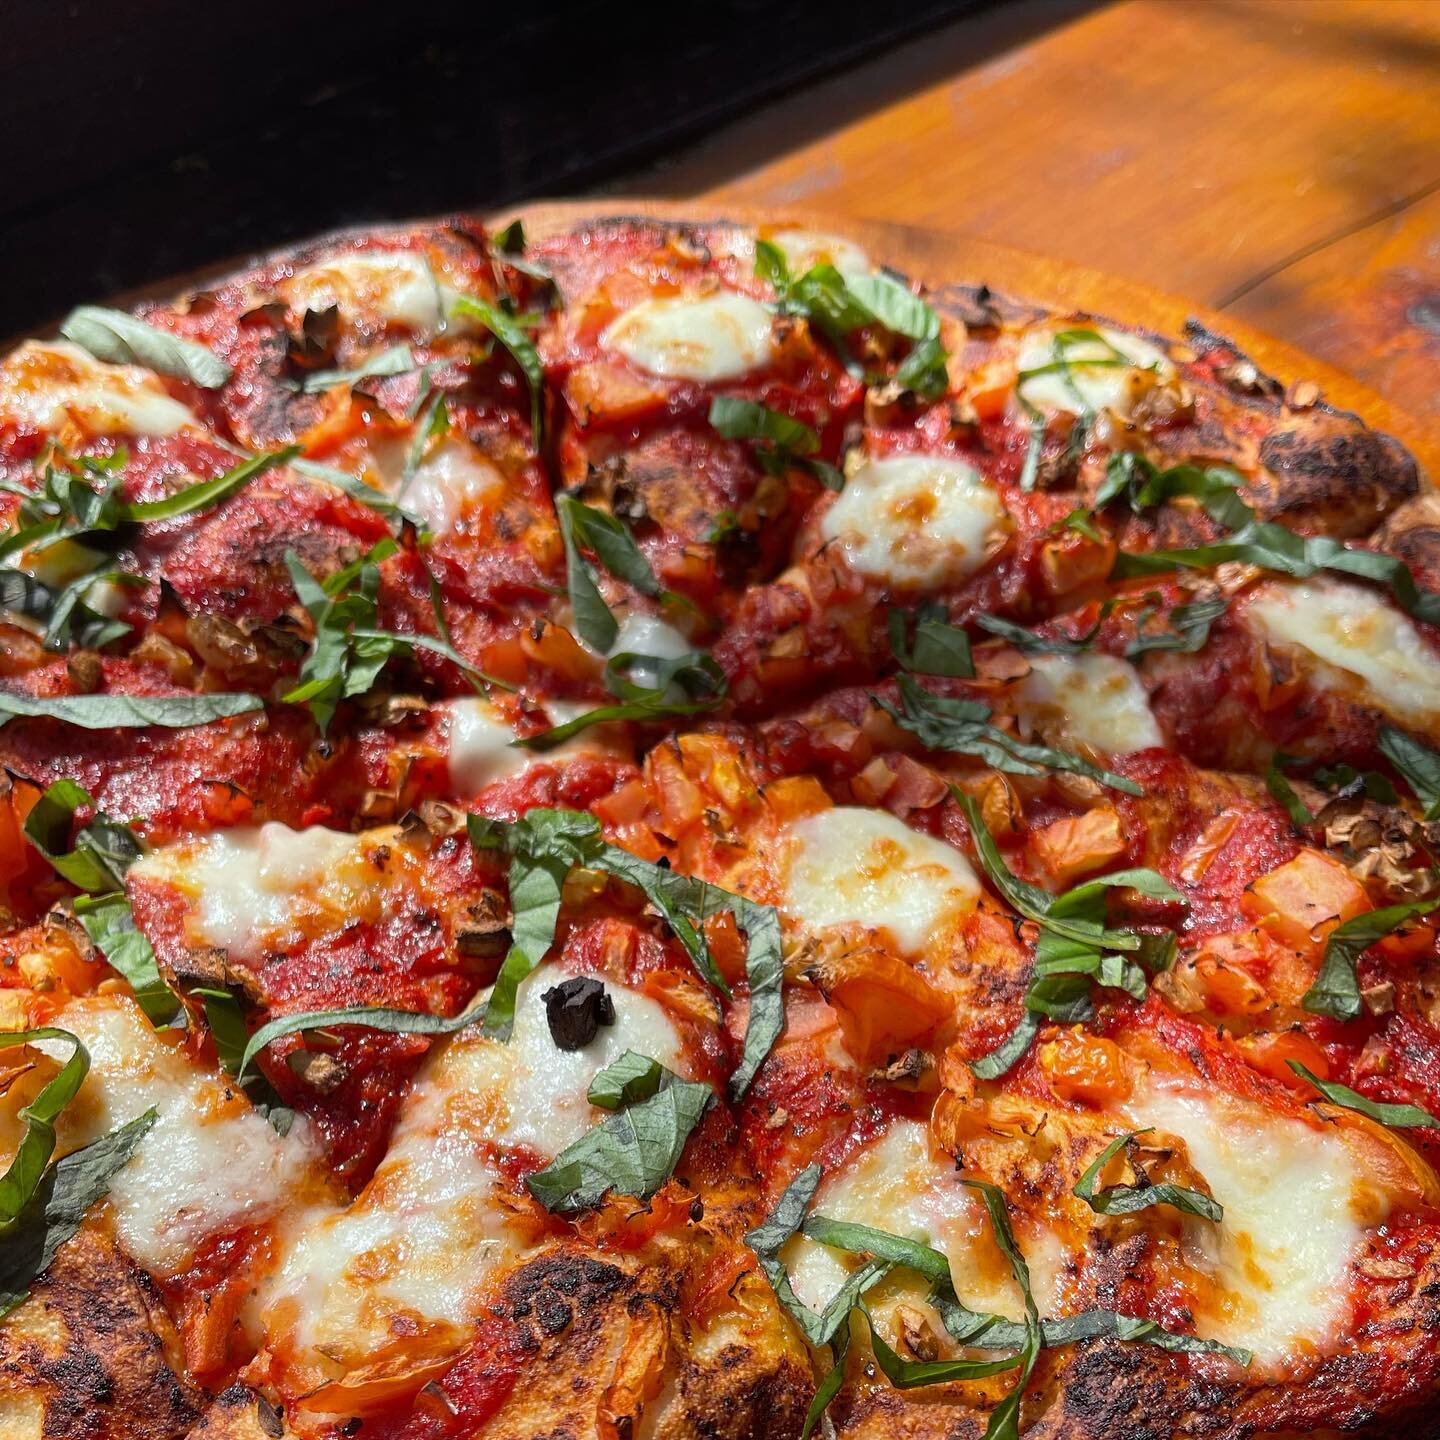 May Feature: Margarita Pizza! 

Our artisan dough smothered in tomato sauce topped with bocconcini cheese, roasted garlic, tomatoes and fresh basil.

#mychosenpizza #metchosin #metchosinbc #yyjpizza #yyjeats #yyjfoodie